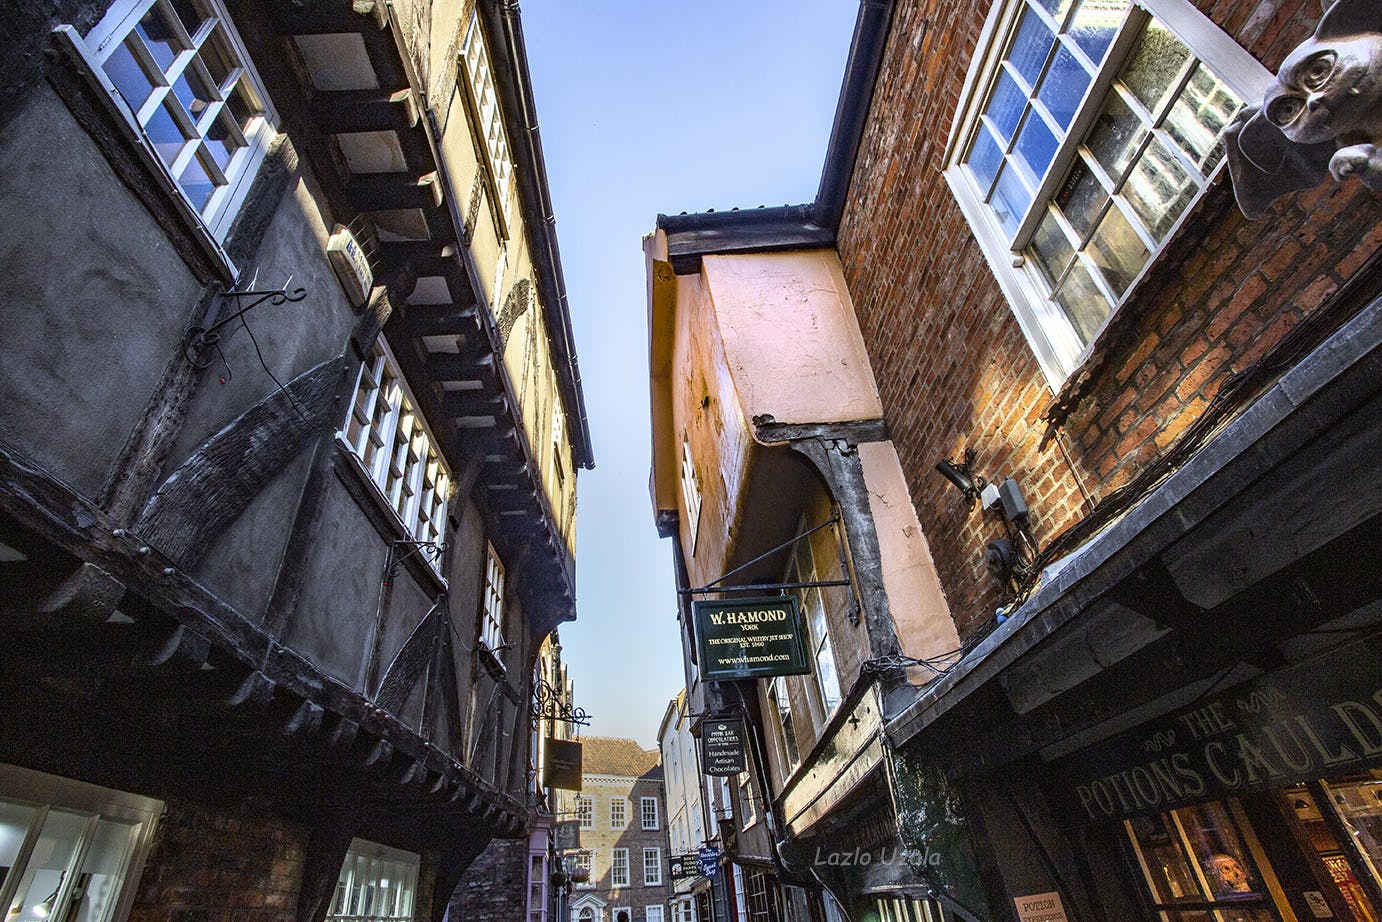 <p>York Shambles is a historic street in York, England, that features preserved medieval buildings, some dating back as far as the 14th century. The street is narrow, with many timber-framed buildings with jettied floors that overhang the street by several feet. </p><p><br></p><p>It was once known as The Great Flesh Shambles, probably from the Anglo-Saxon Fleshammels (literally flesh-shelves), the word for the shelves that butchers used to display their meat.</p><p><br></p><p>Today, the street is home to a variety of shops, eateries and attractions, such as the Ghost Shop, the Sweet Shop and the Coin Shop. It is also a popular tourist destination, as it resembles Diagon Alley from the Harry Potter series.</p><p><br></p>